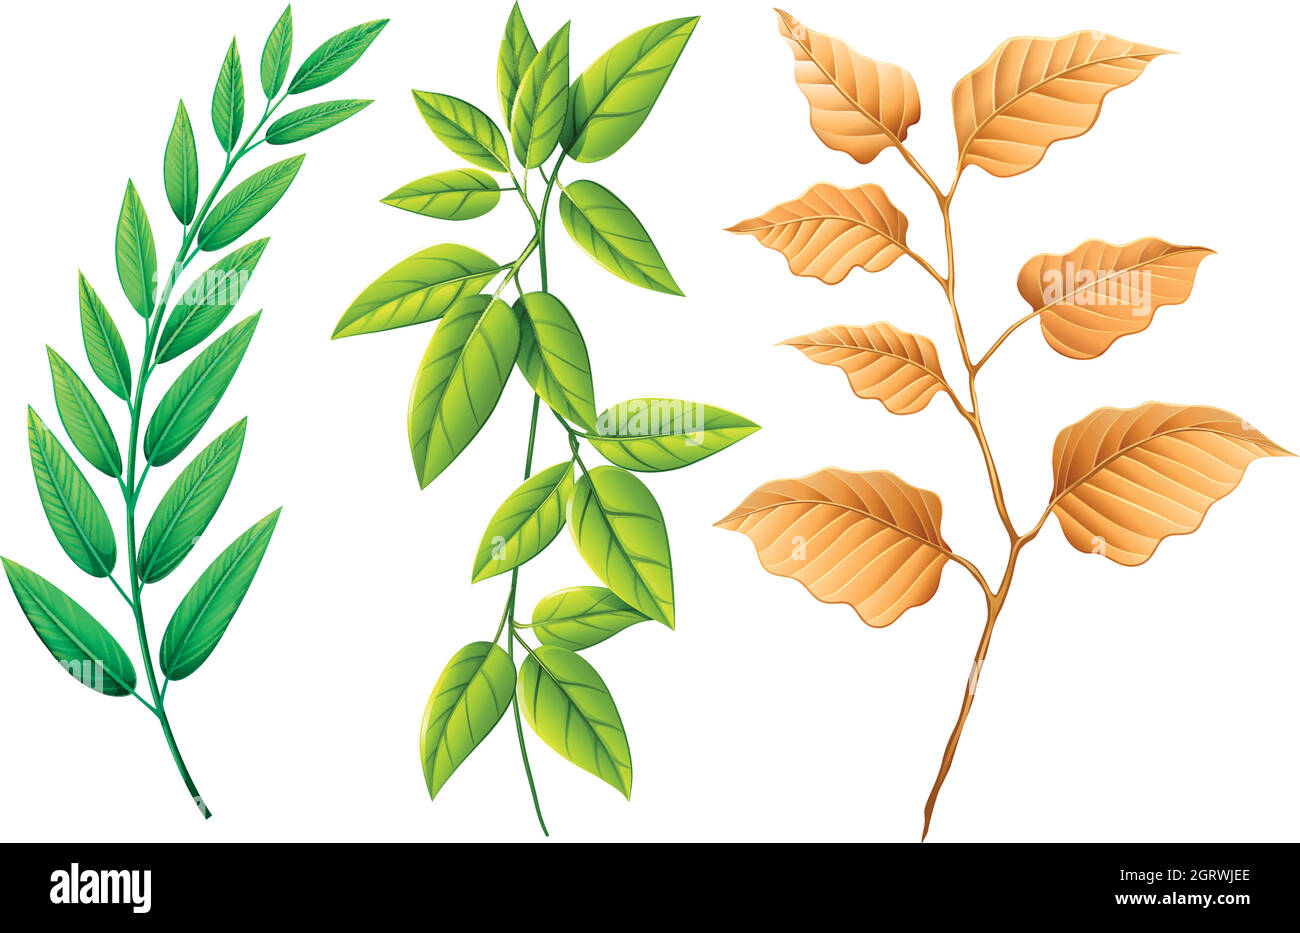 three-types-of-leaves-stock-vector-image-art-alamy